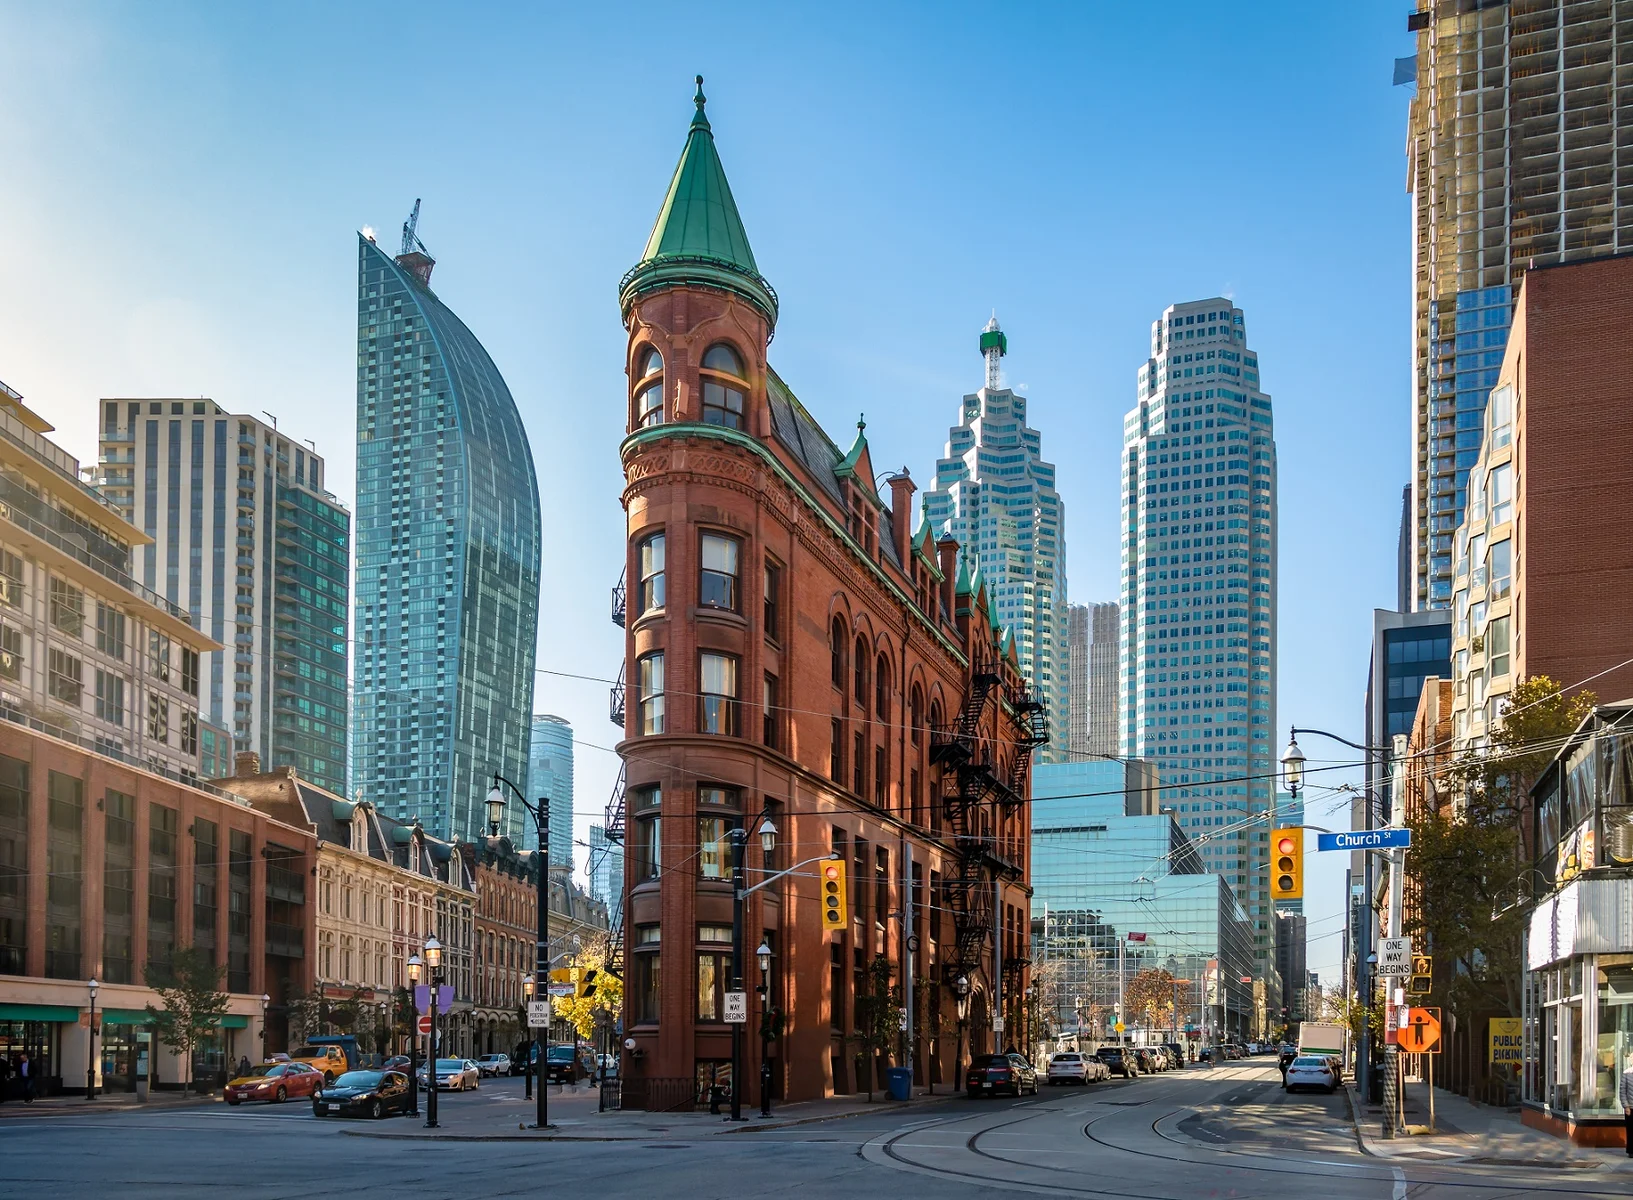 The Gooderham Building in downtown Toronto